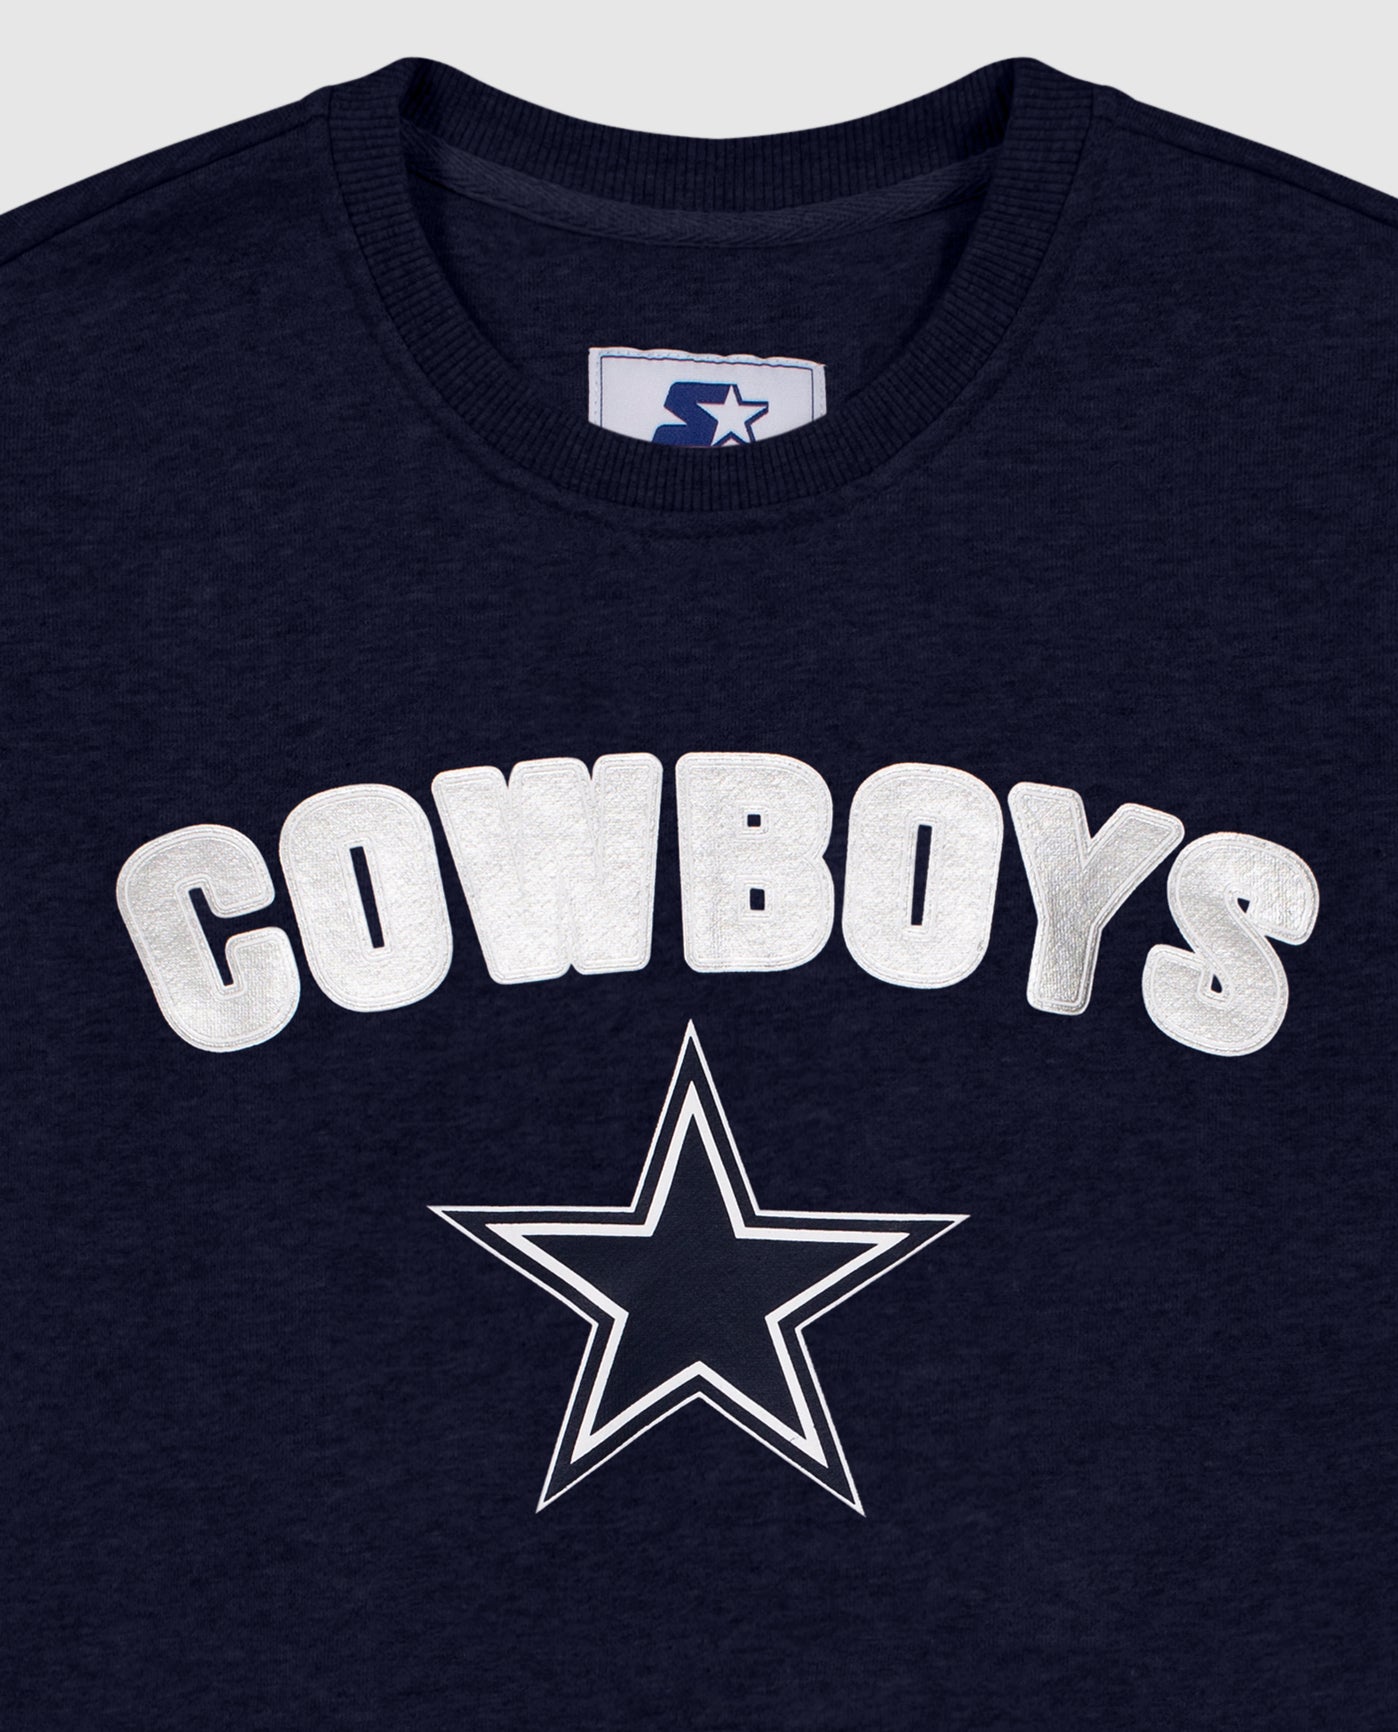 Team Name And Logo On Front Of Dallas Cowboys Long Sleeve Crew Neck Shirt | Cowboys Navy